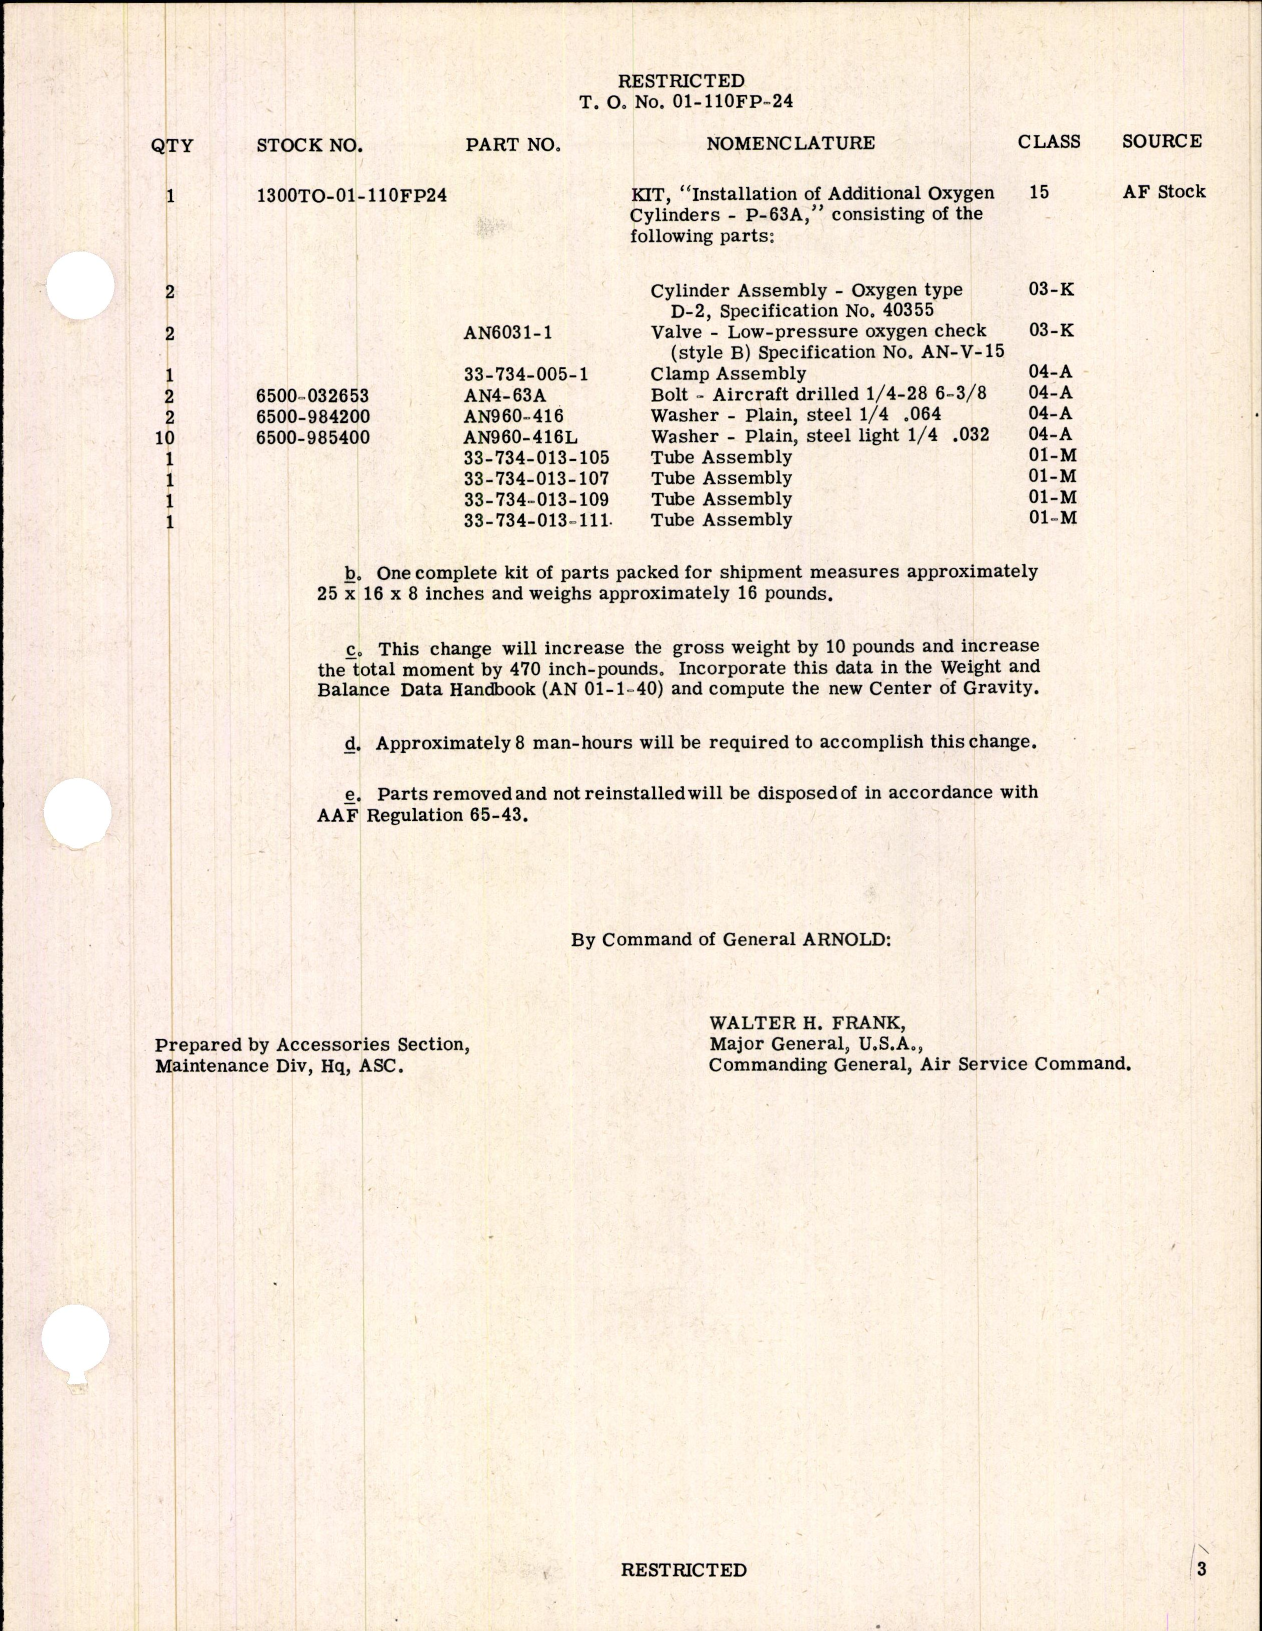 Sample page 3 from AirCorps Library document: Installation of Additional Oxygen Cylinders for P-63A